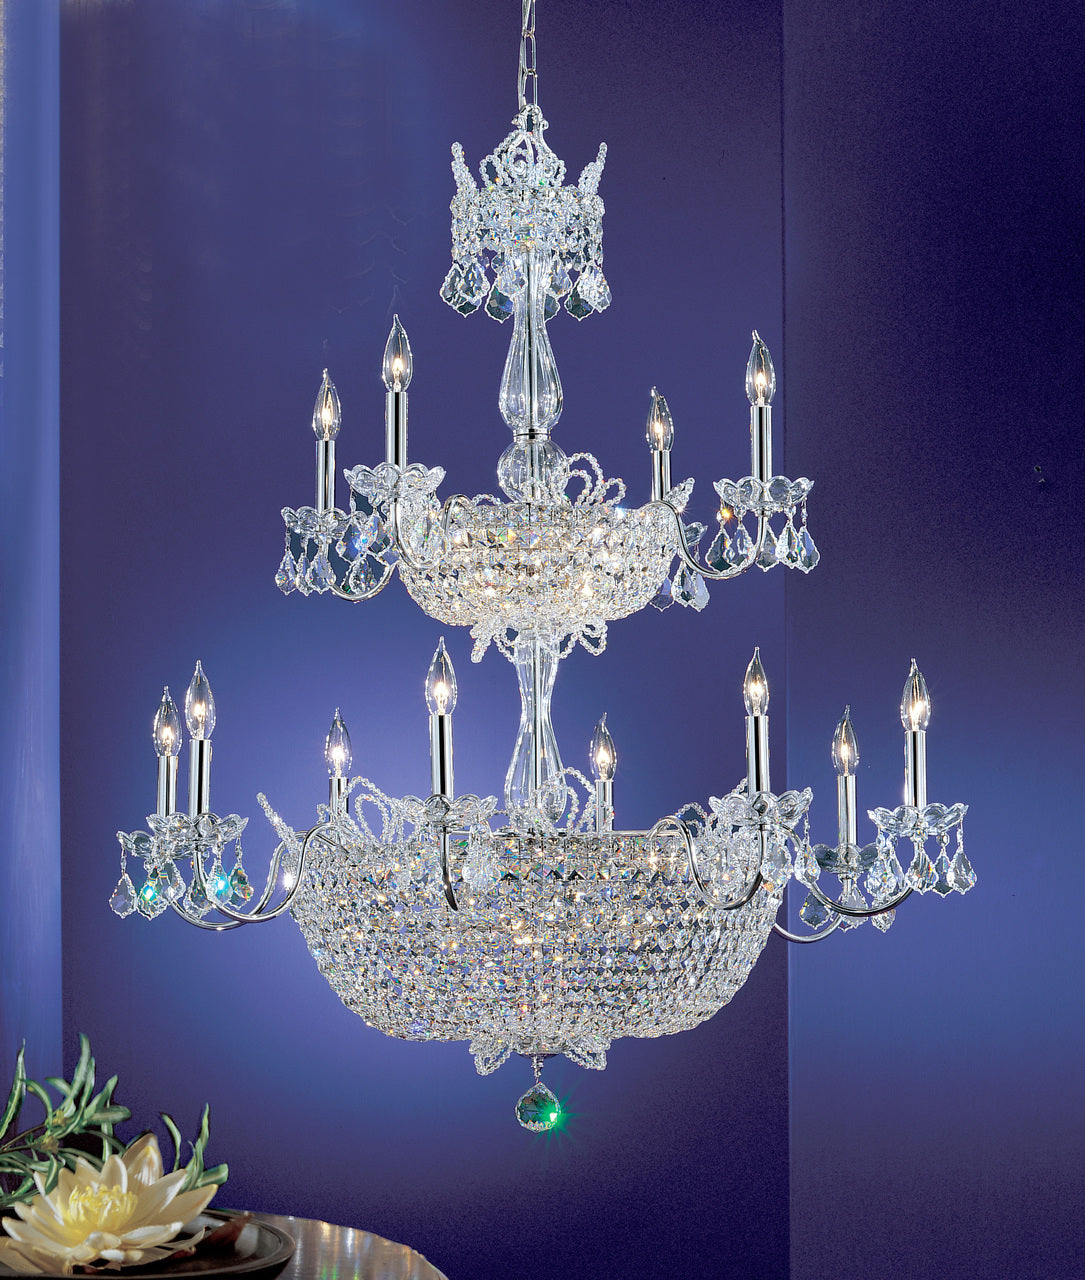 Classic Lighting 69789 CH CP Crown Jewels Crystal Chandelier in Chrome